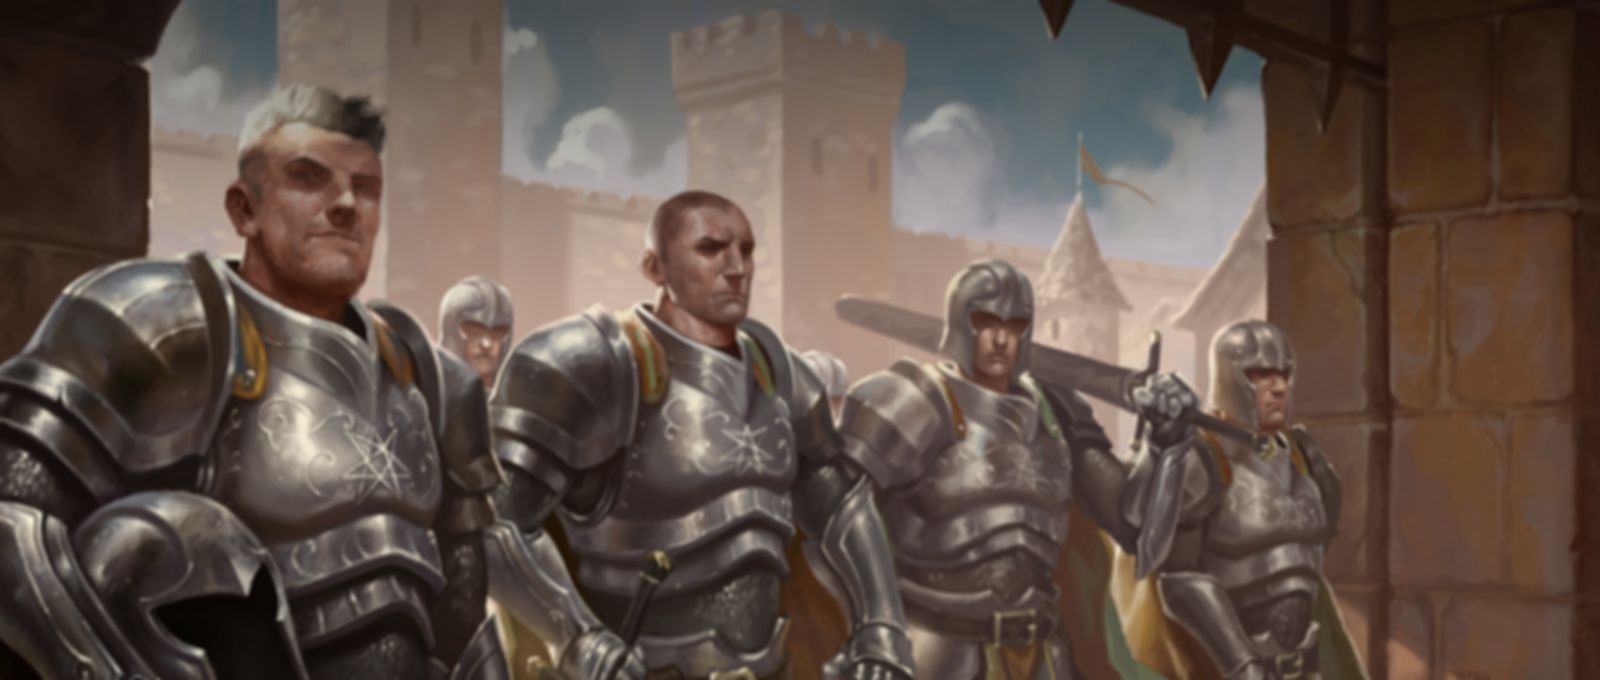 A Song of Ice & Fire: Tabletop Miniatures Game – The Warrior's Sons